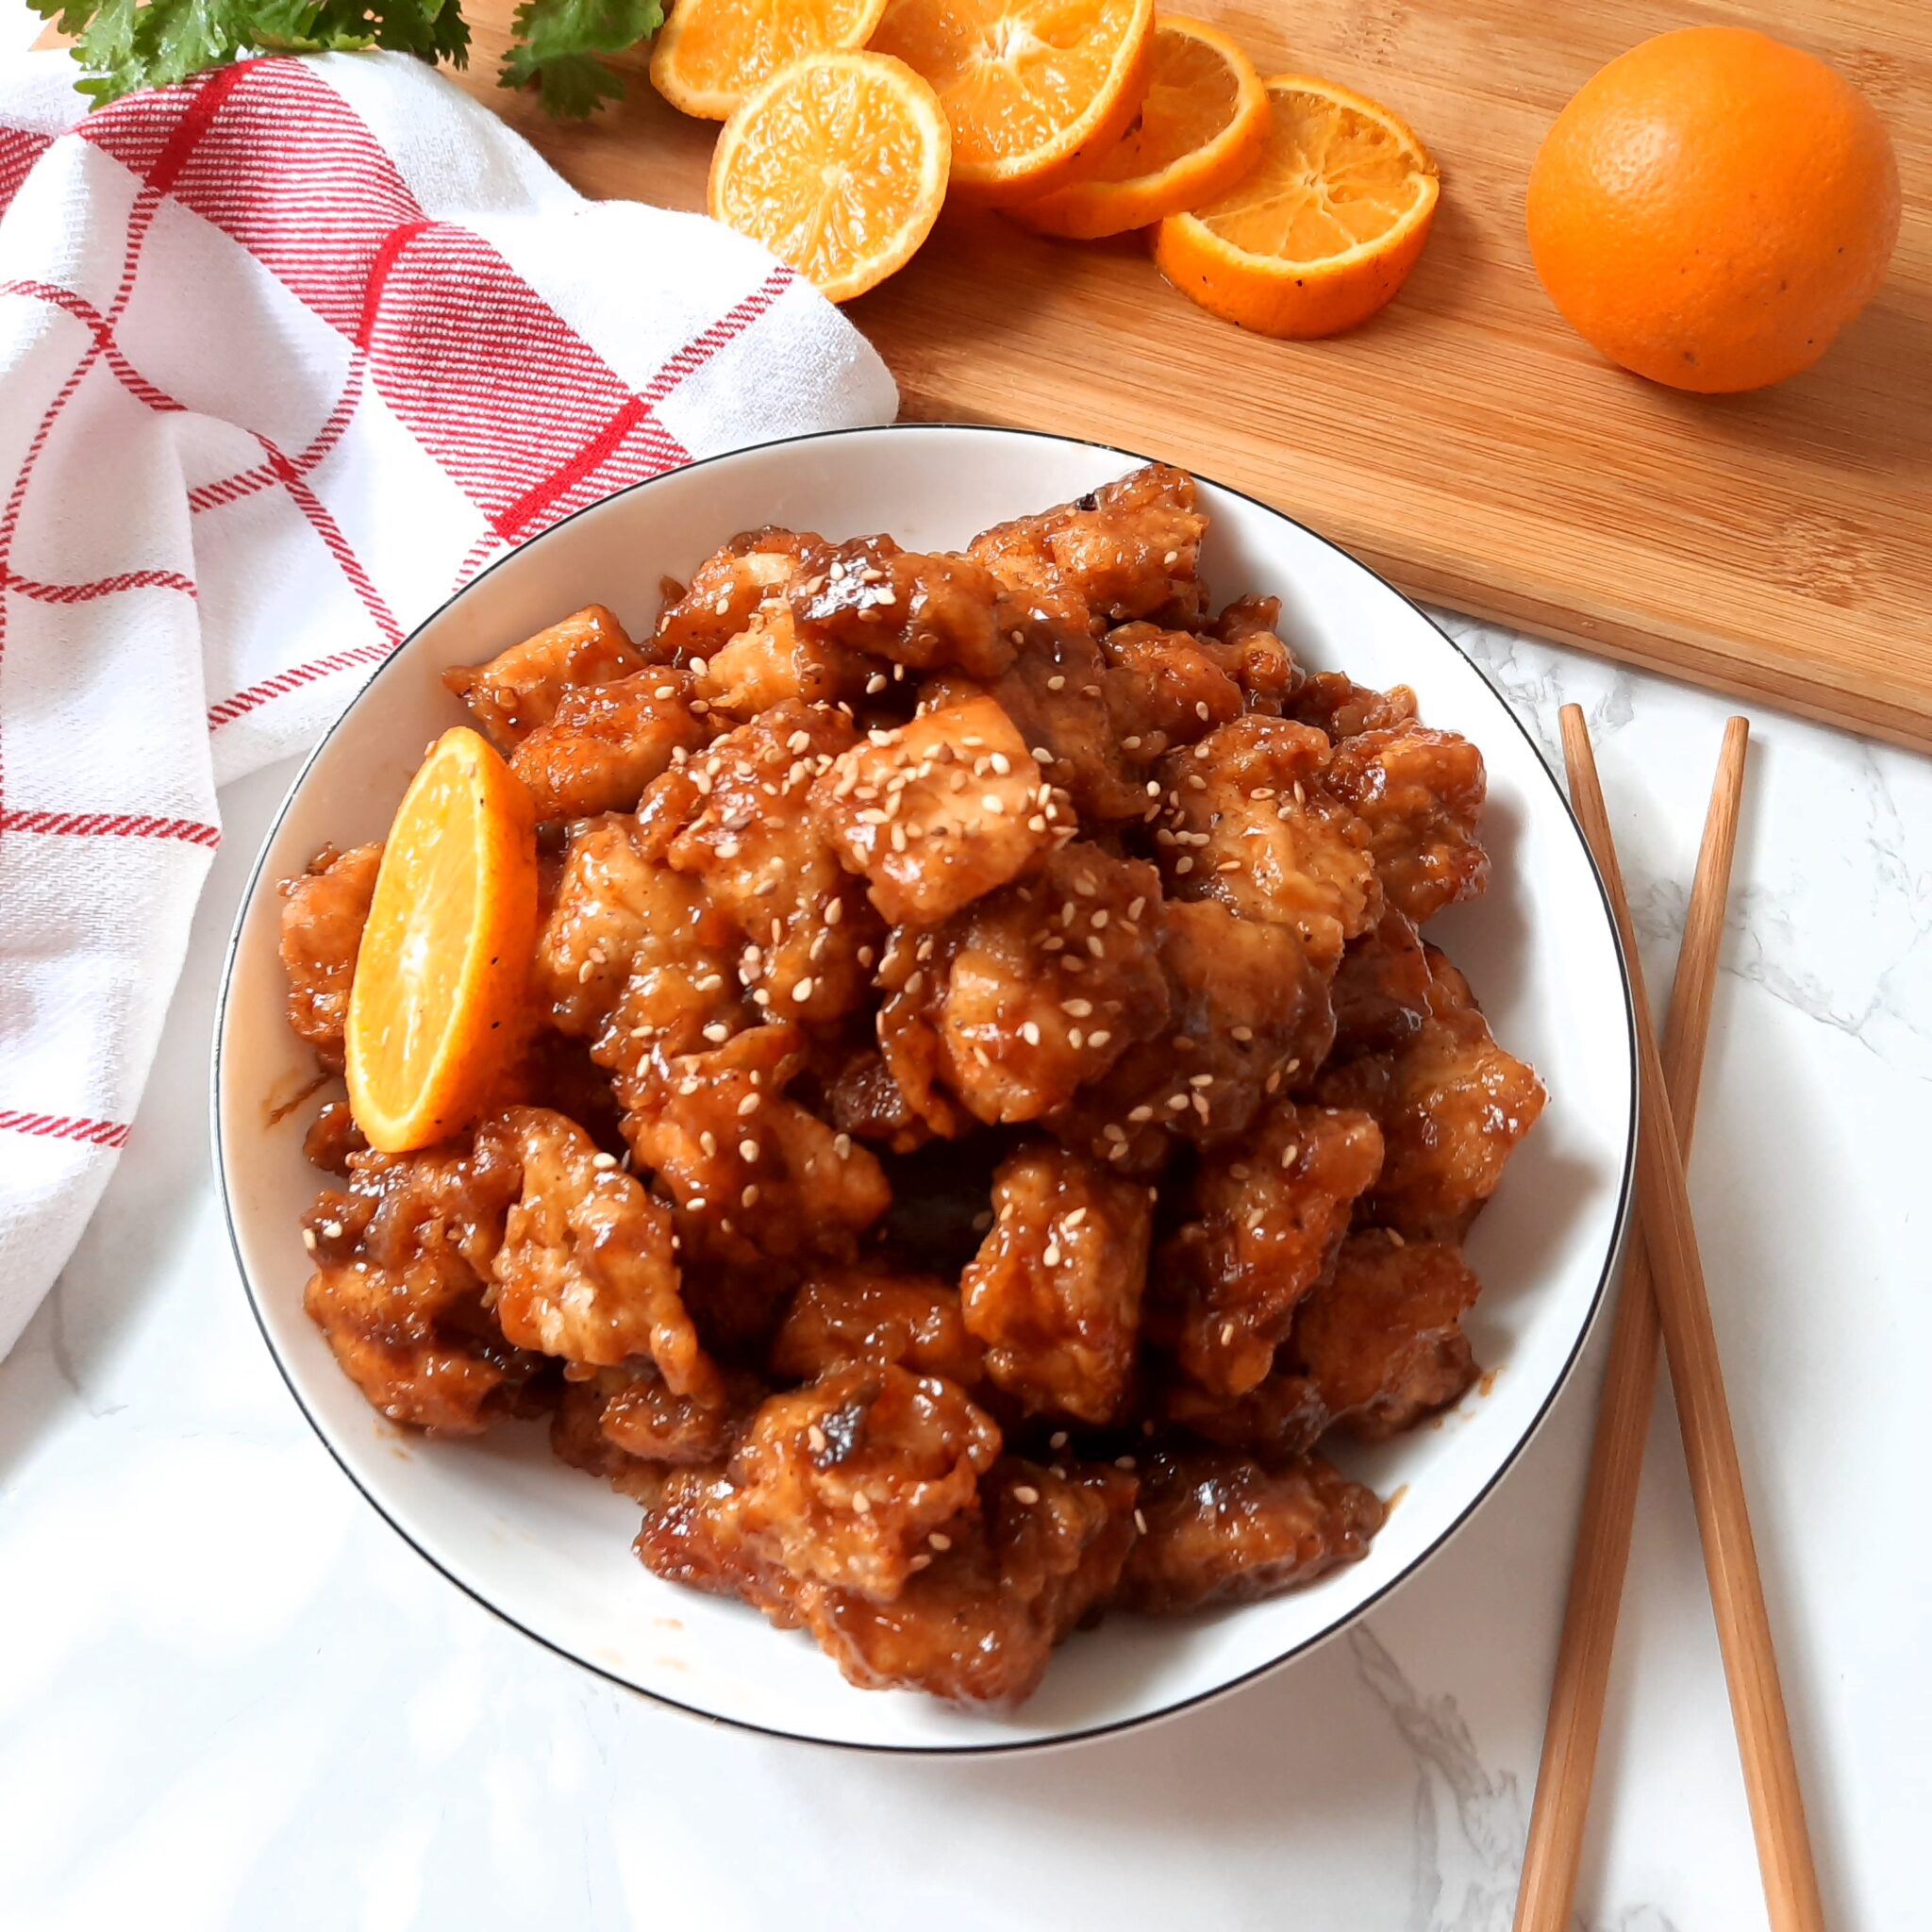 Tangy and Tempting: Orange Chicken Recipe to Satisfy Your Cravings